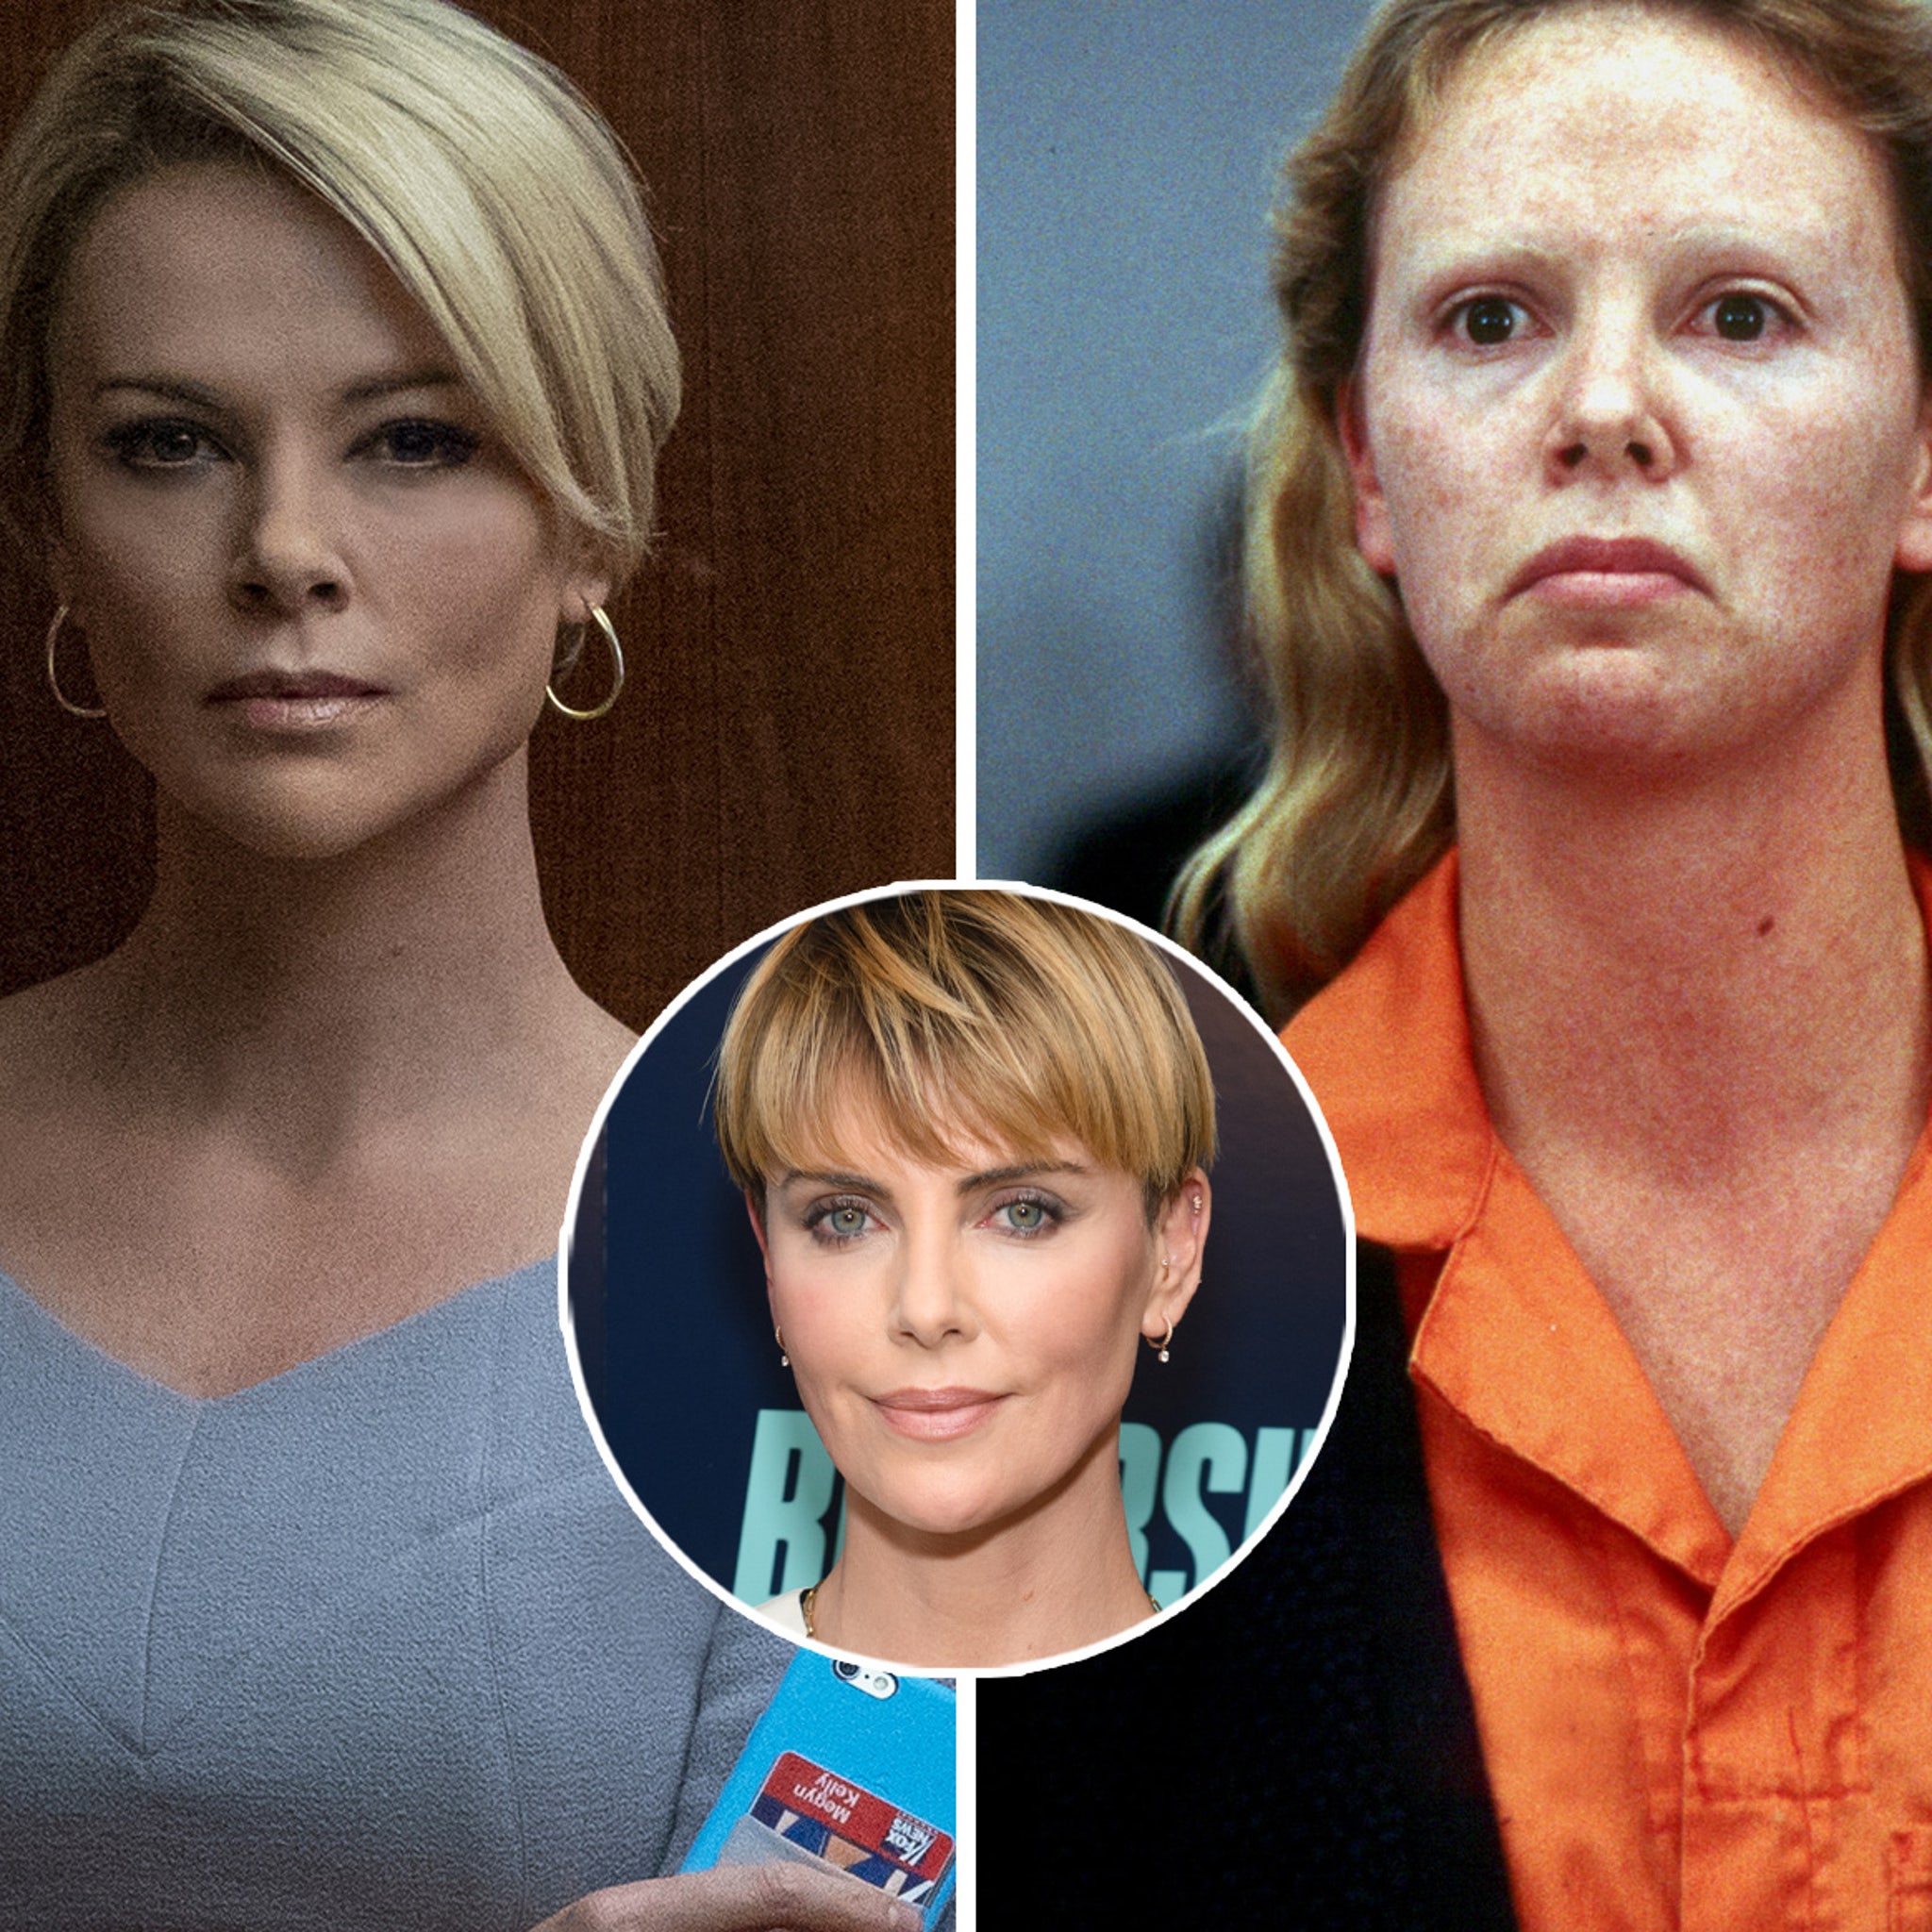 Charlize Theron Says Megyn Kelly Role Was Harder Than Playing Serial Killer If you have good quality pics of charlize theron, you can add them to forum. charlize theron says megyn kelly role